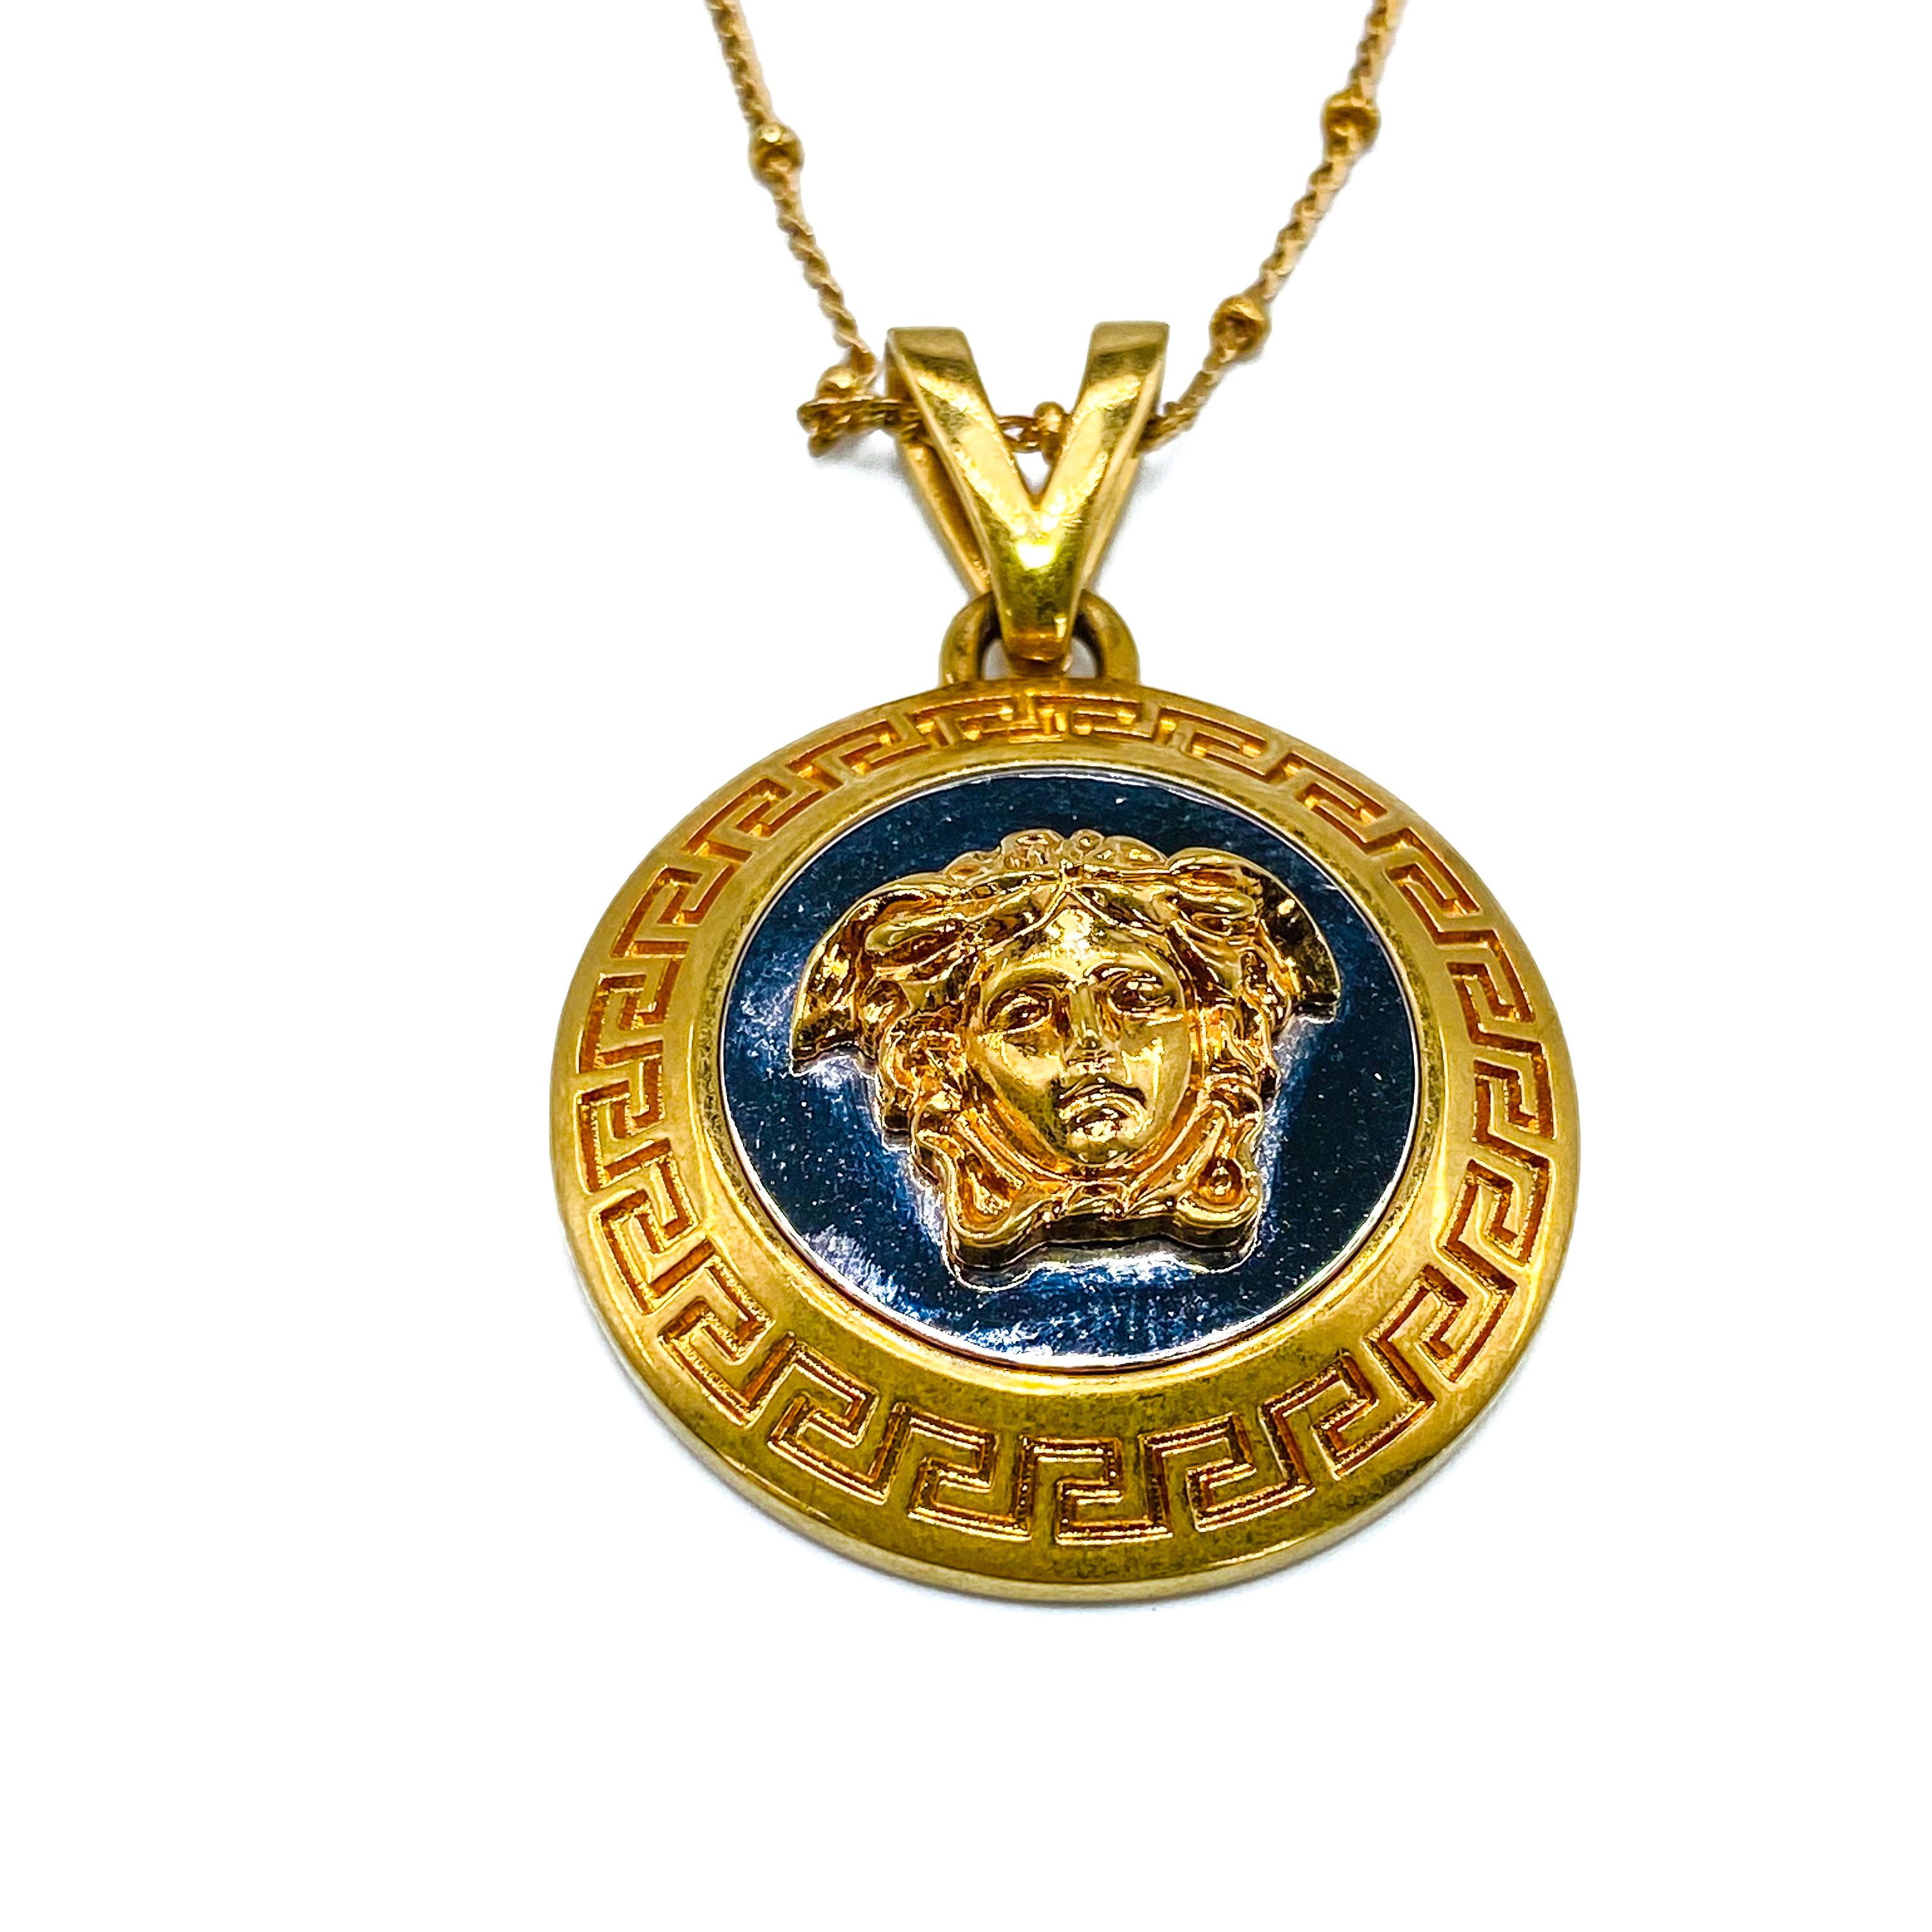 Versace 2000s Medusa Pendant Necklace 

Super cool iconic medusa pendant from the legendary Versace. Made in Italy from gold plated metal, this incredible necklace will add a contemporary 90s feel to your party wear

Gianni Versace was a visionary